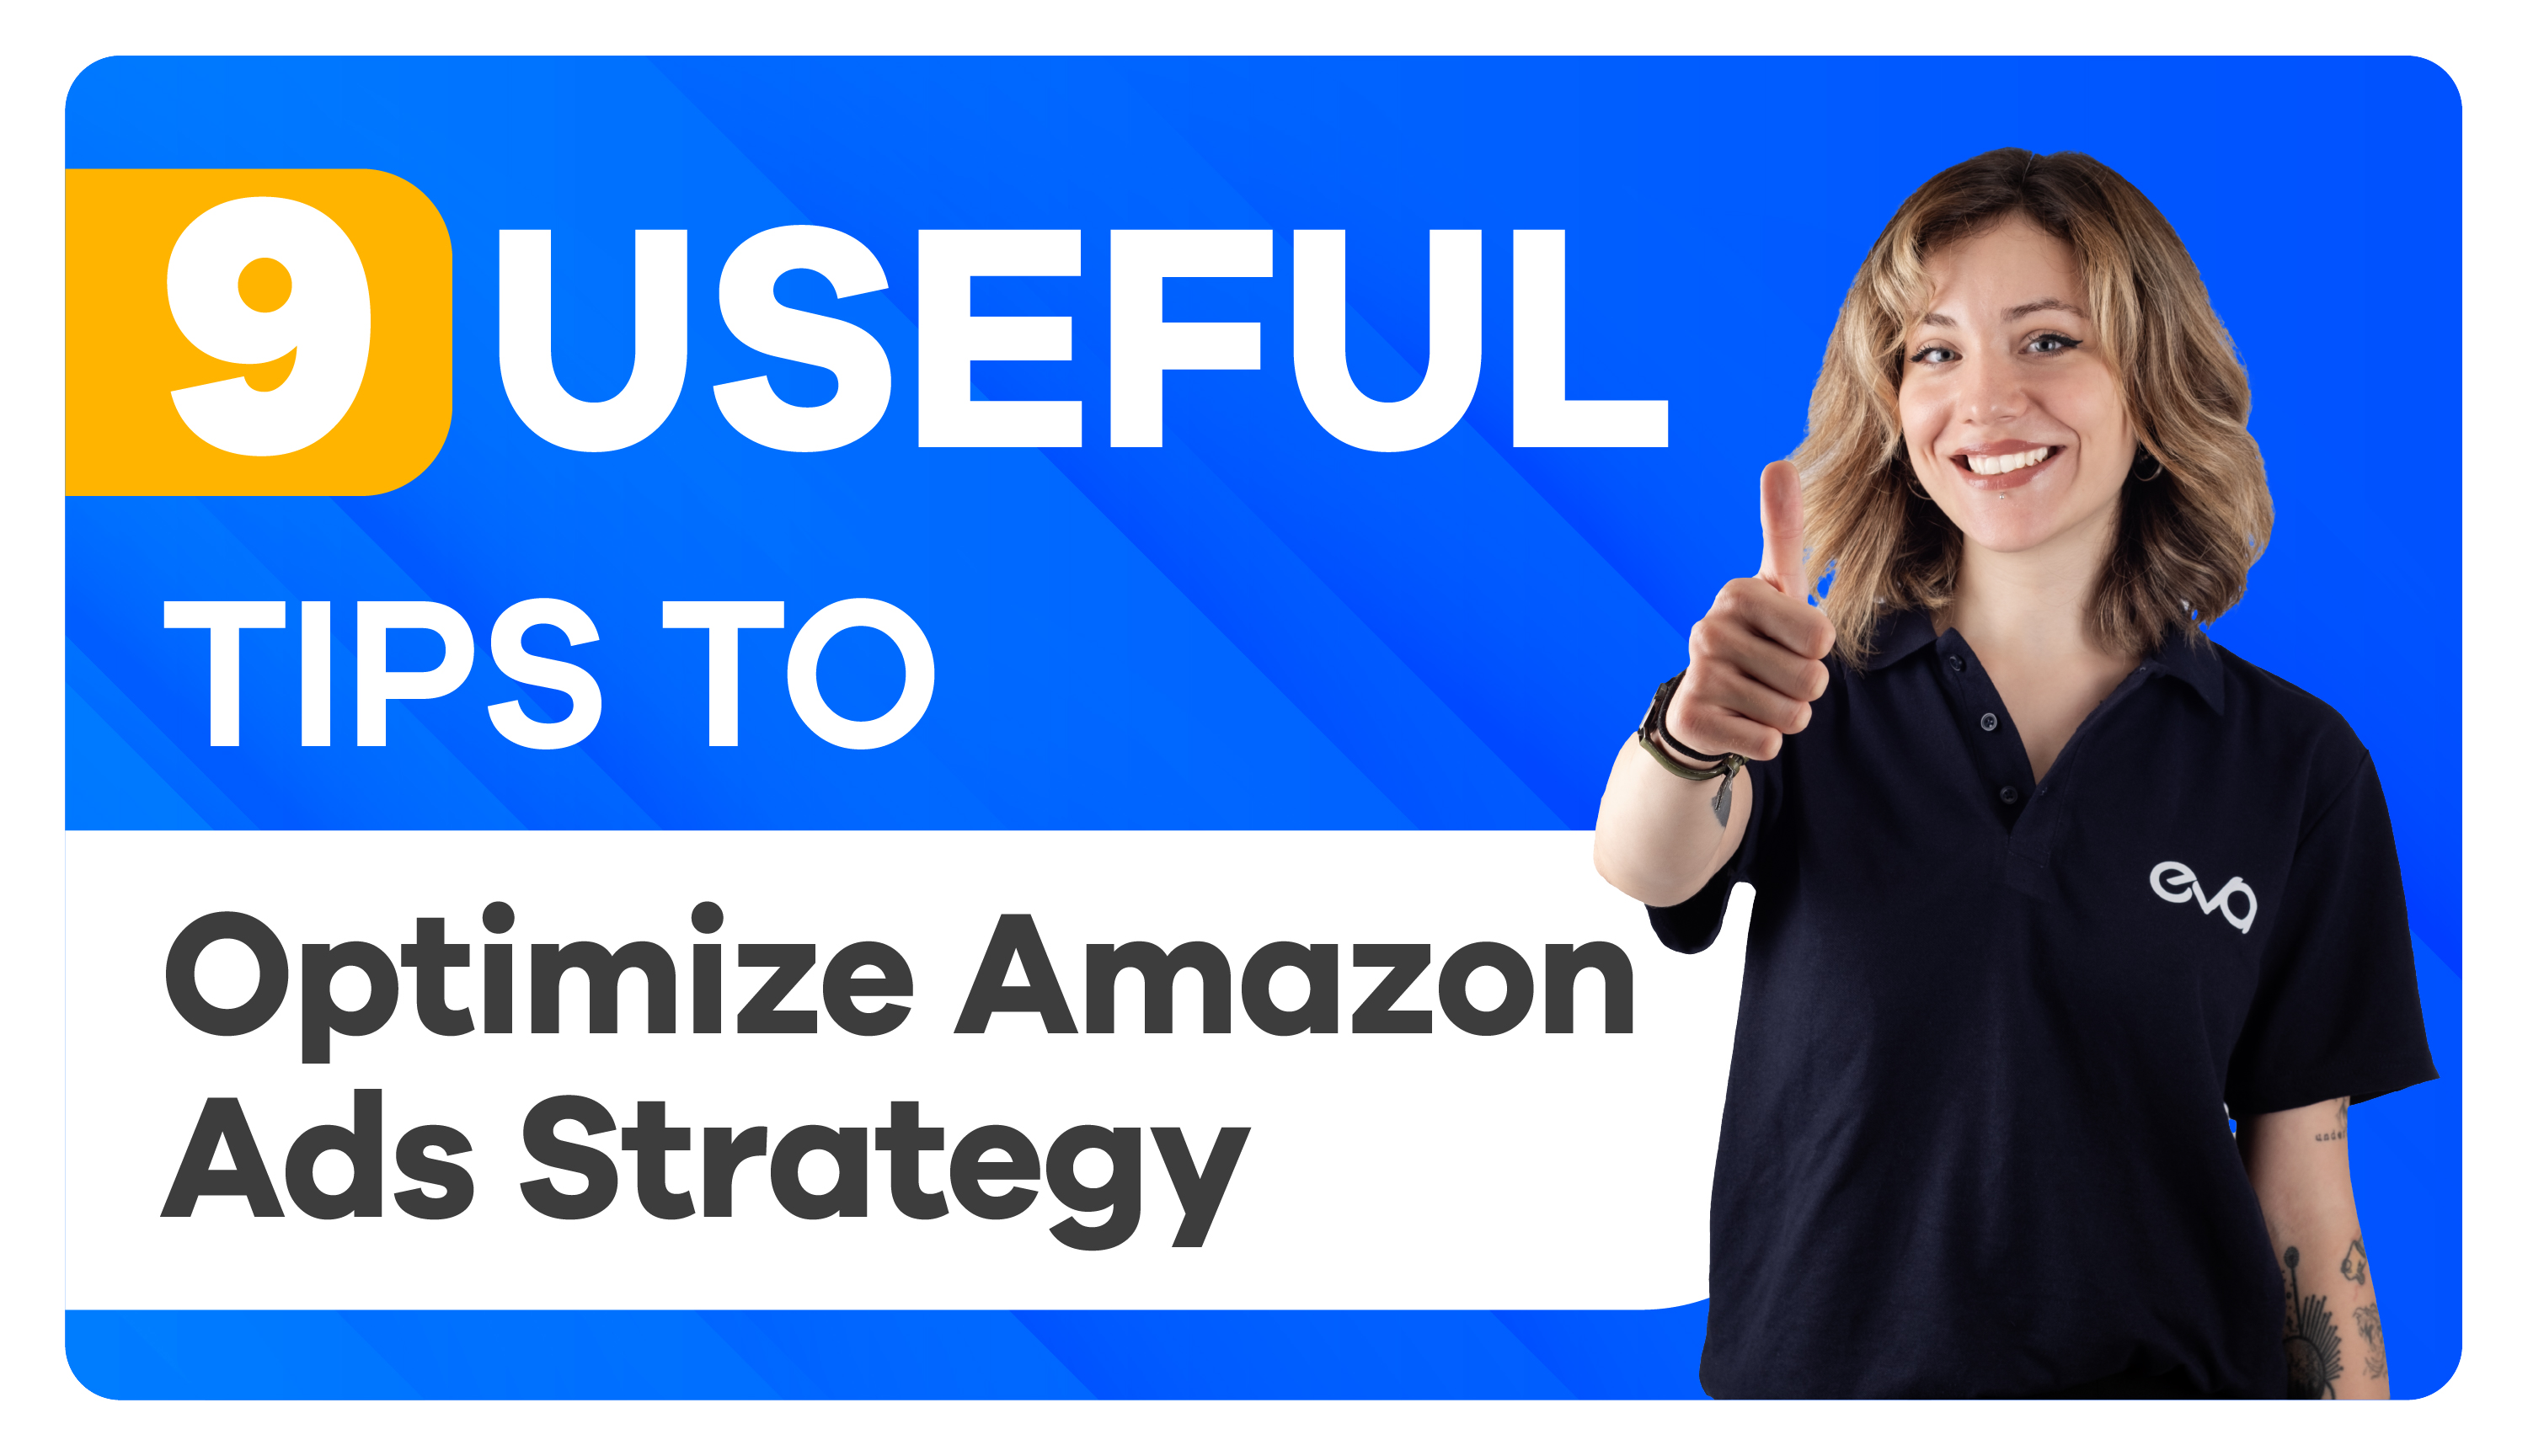 9 Useful Tips to Optimize Your Amazon Advertising Strategy